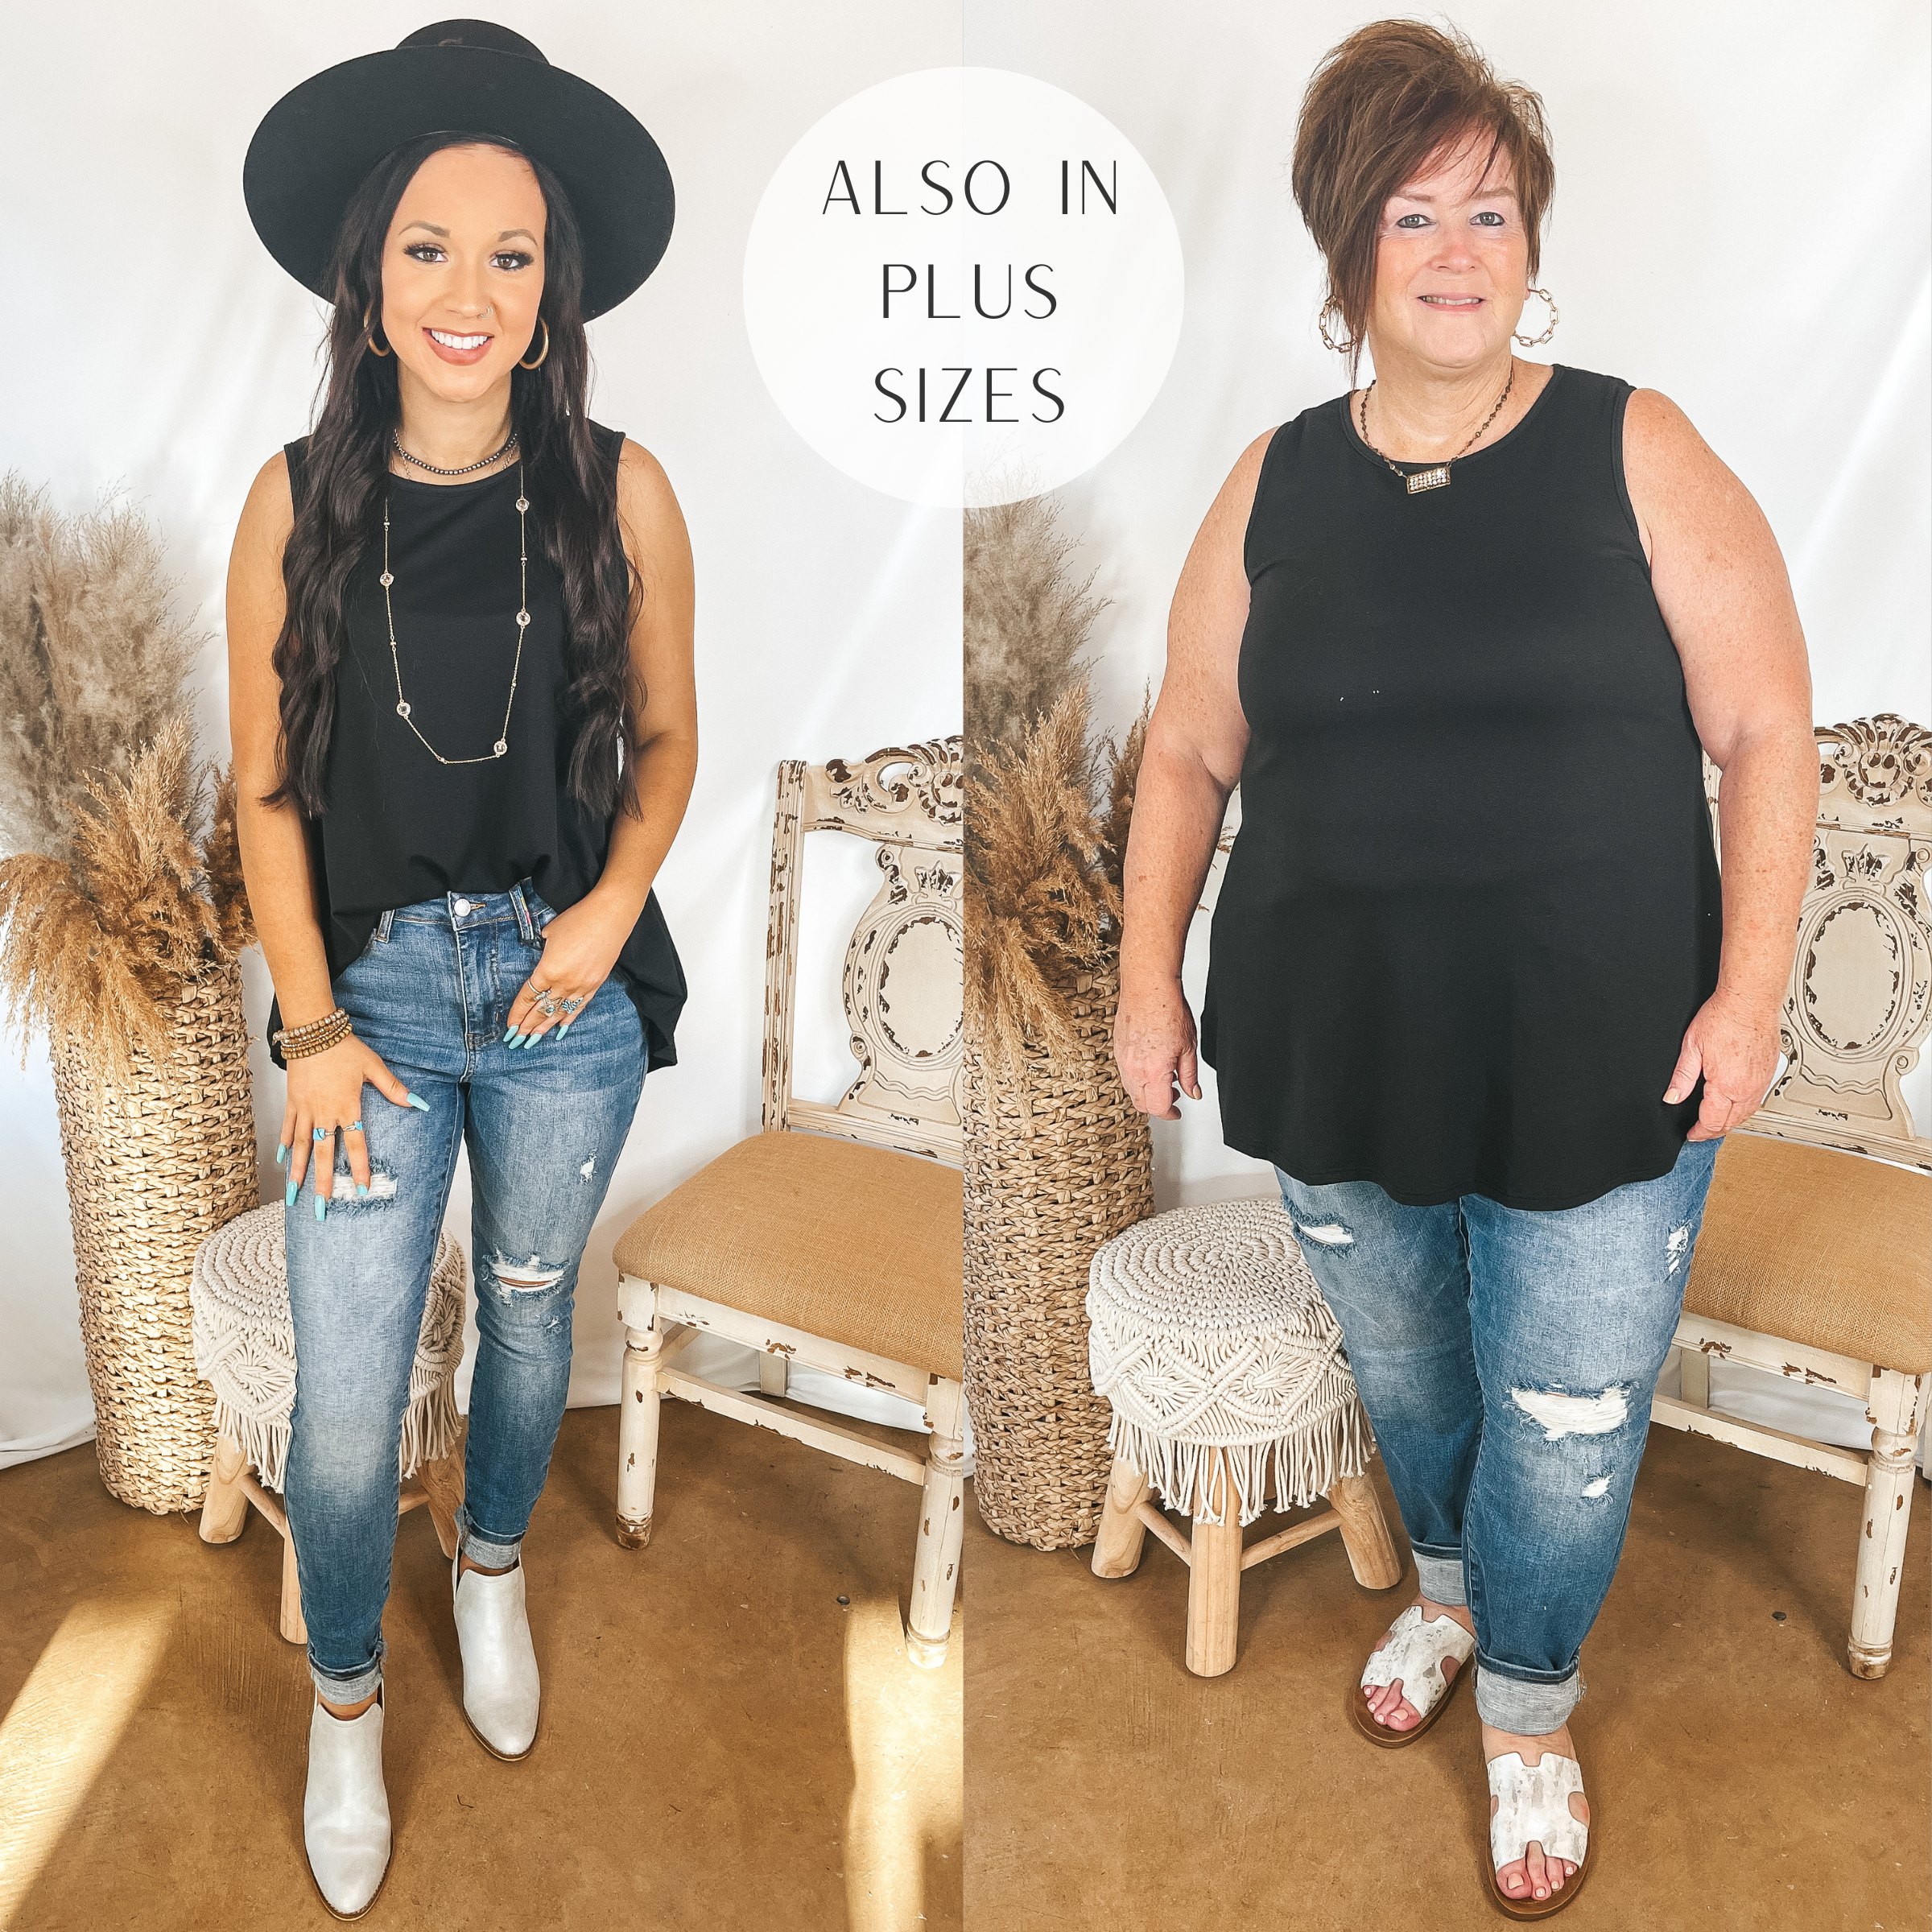 Models are wearing a black a line tank top. Size small model has it paired with light wash skinny jeans, white booties, and a black hat. Plus size model has it paired with distressed skinny jeans, white sandals, and Pink Panache jewelry.